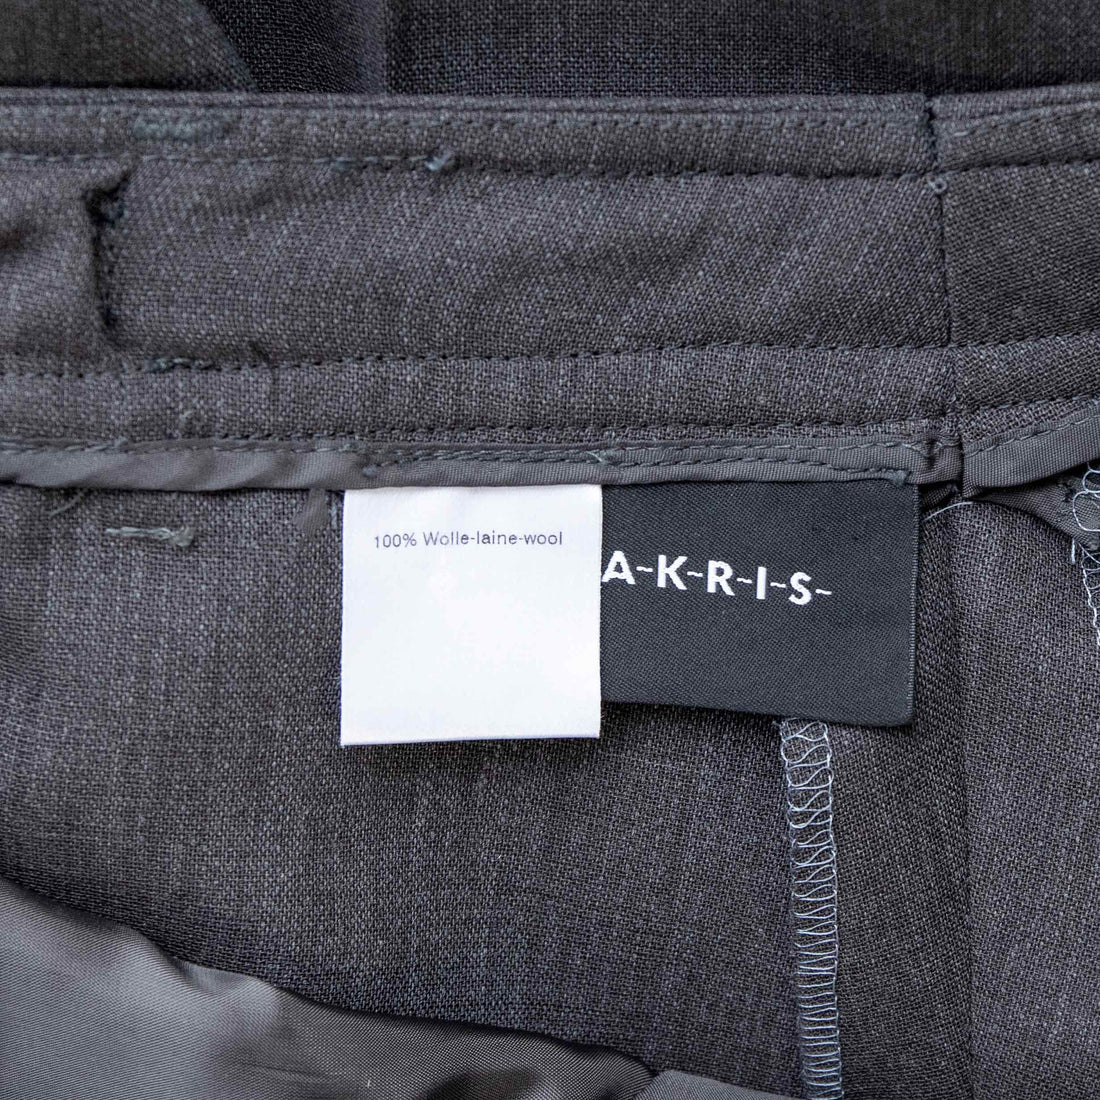 Akris trousers suit in anthracite